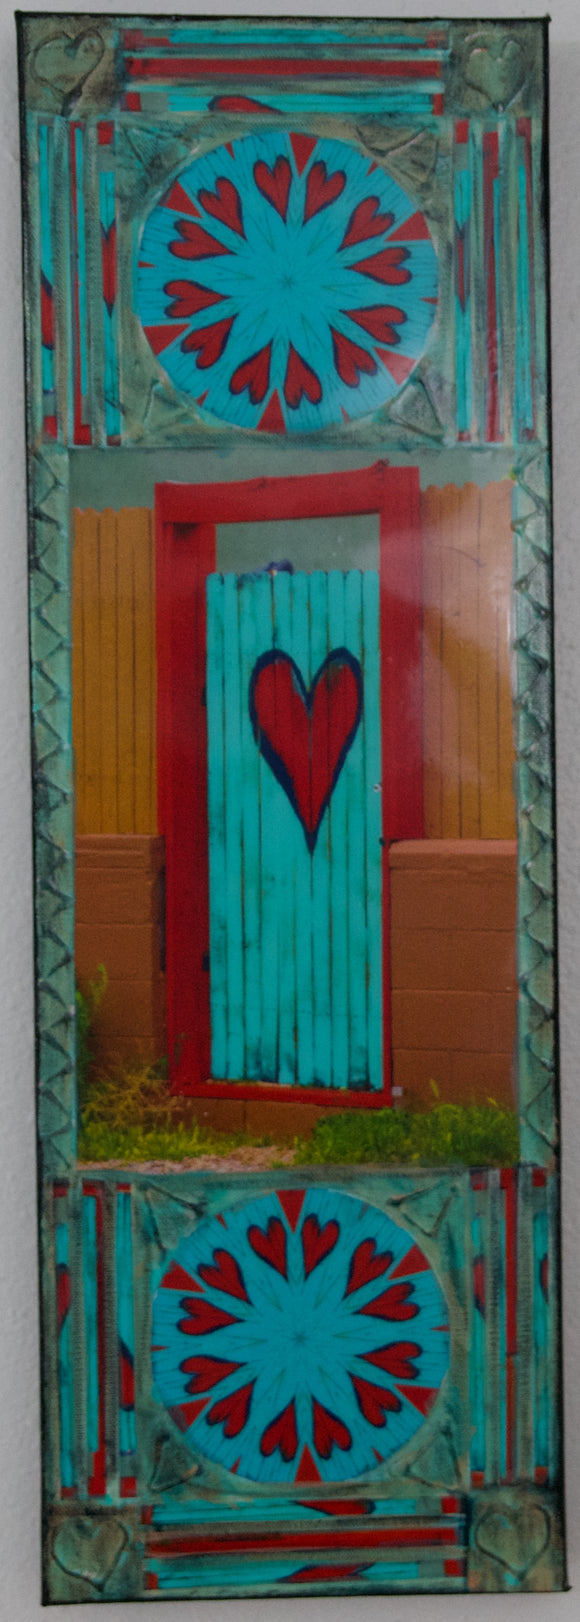 Heart Gate with Two Mandalas ,8 x 24 x 1.5